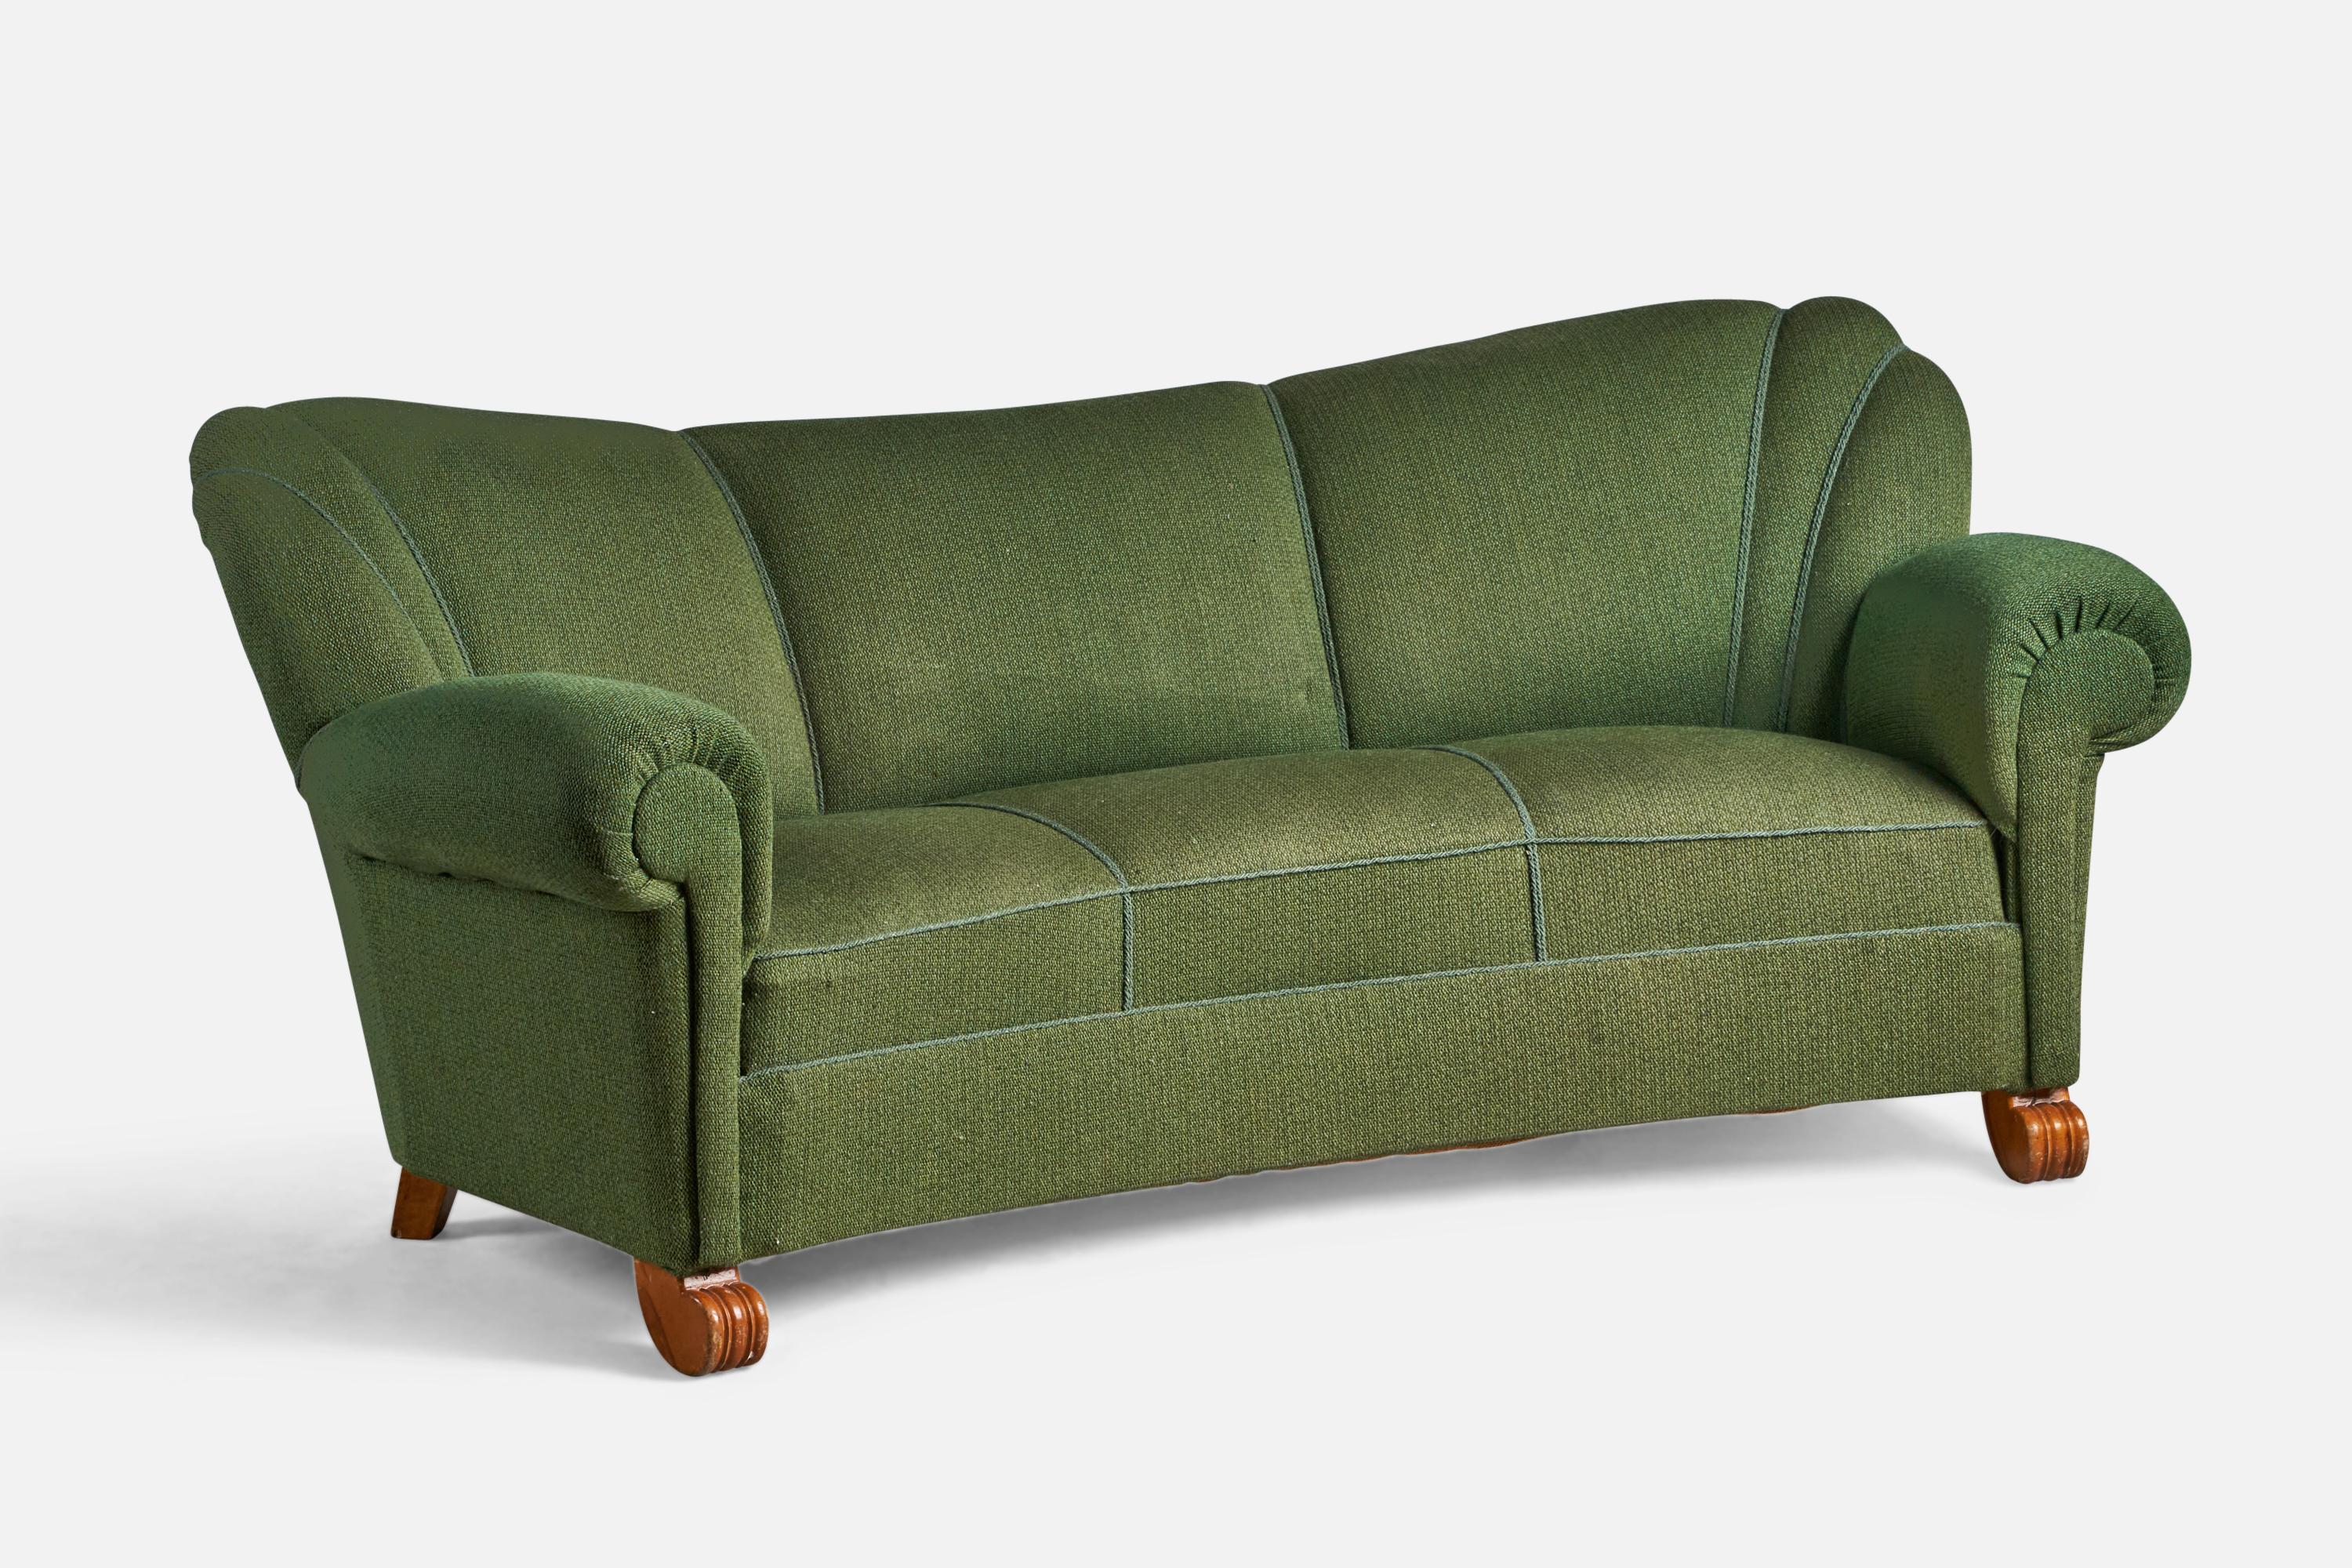 Mid-20th Century Tor Wolfenstein, Curved Sofa, Fabric, Wood, Sweden, 1940s For Sale